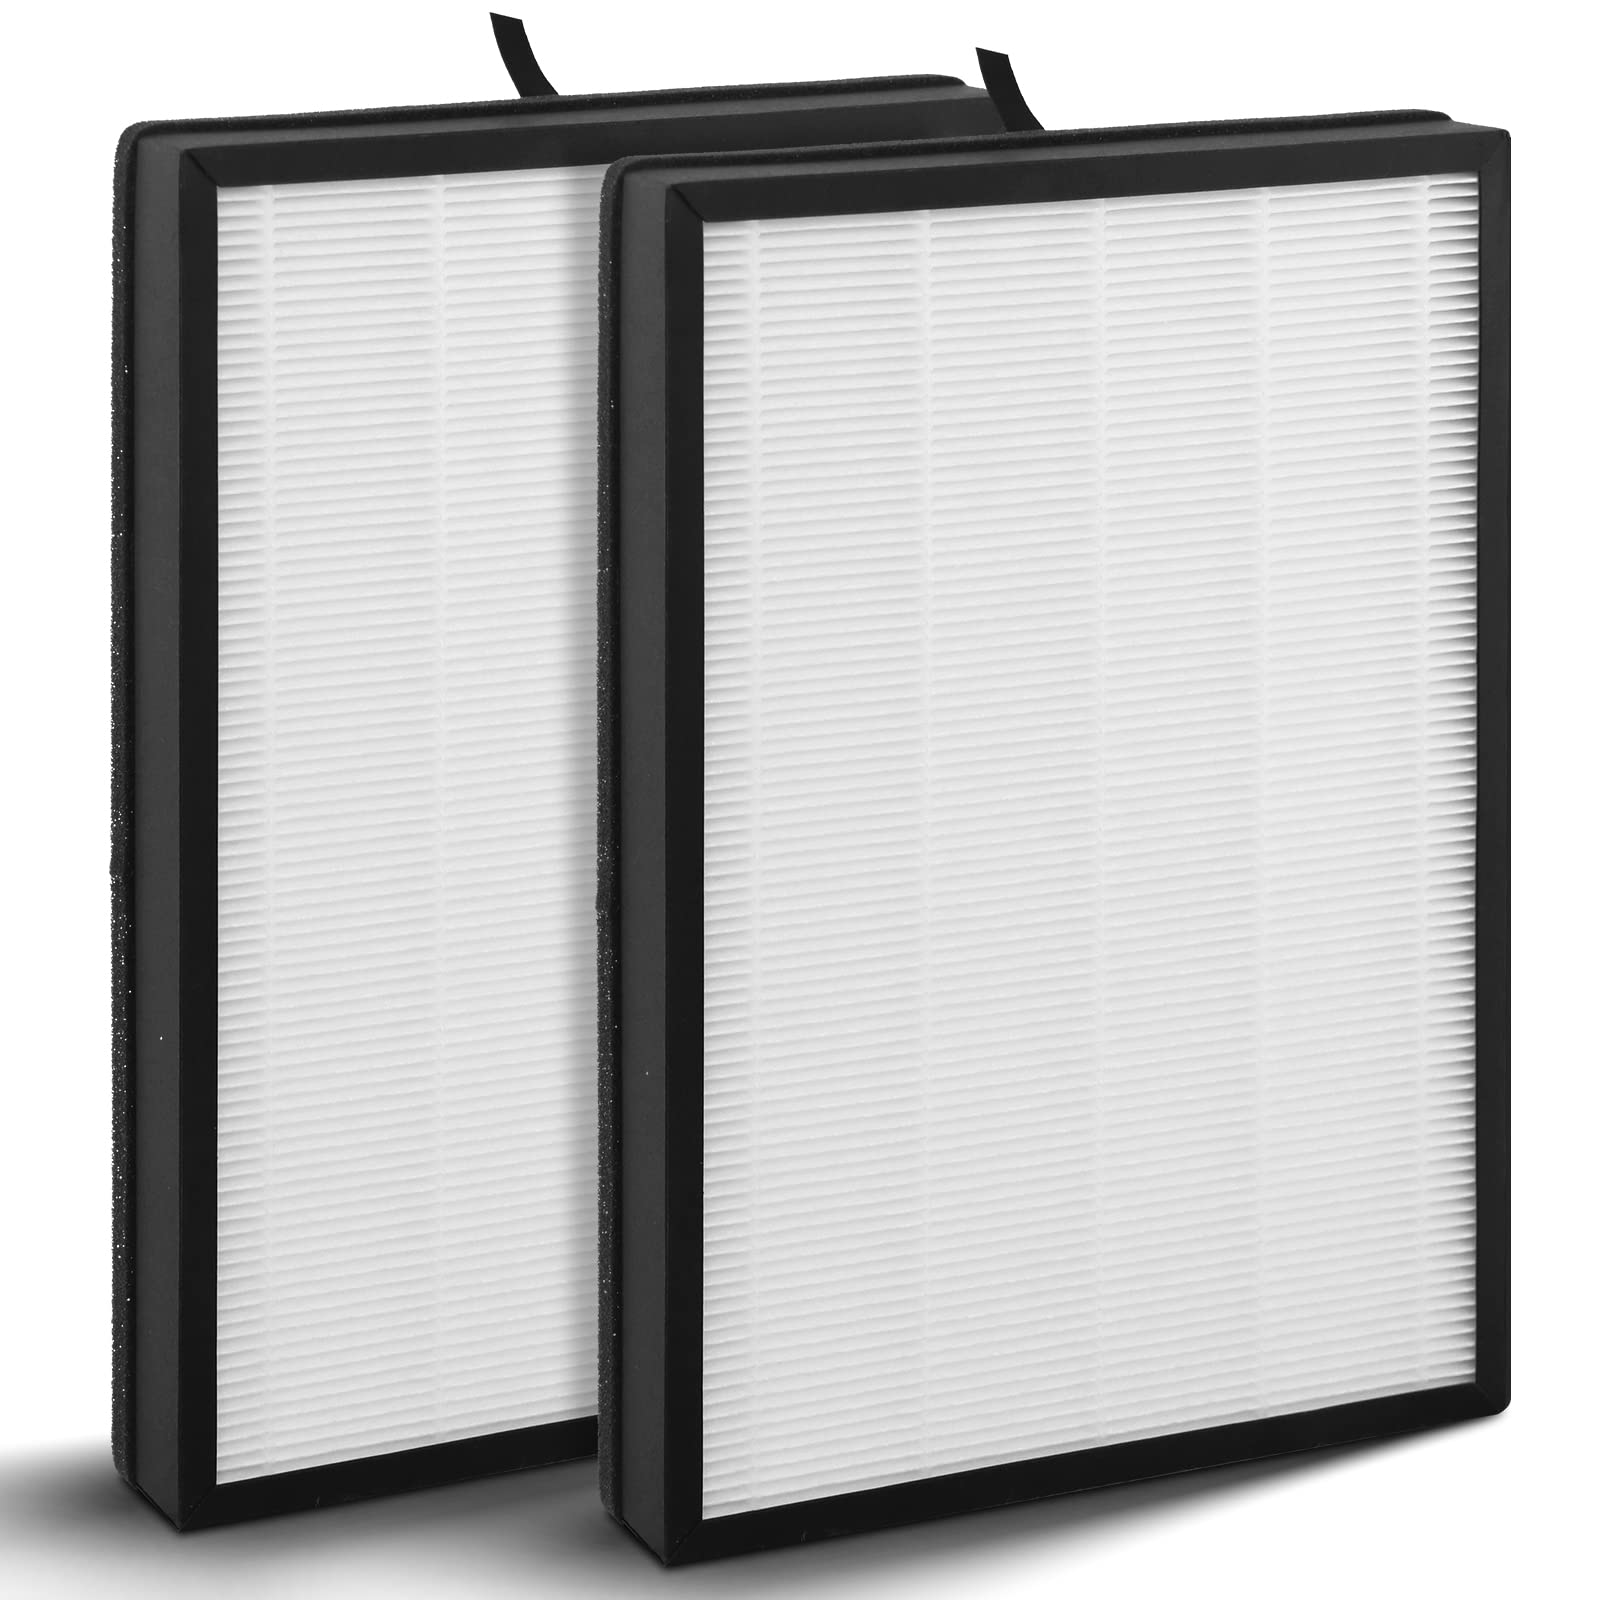 GoKBNY 2-Pack FA-500 True HEPA Replacement Filter Compatible with Famree FA500 and Aiper KJ200 Purifier, 2-IN-1 Activated Carbon Filter + H13 True HEPA Filters